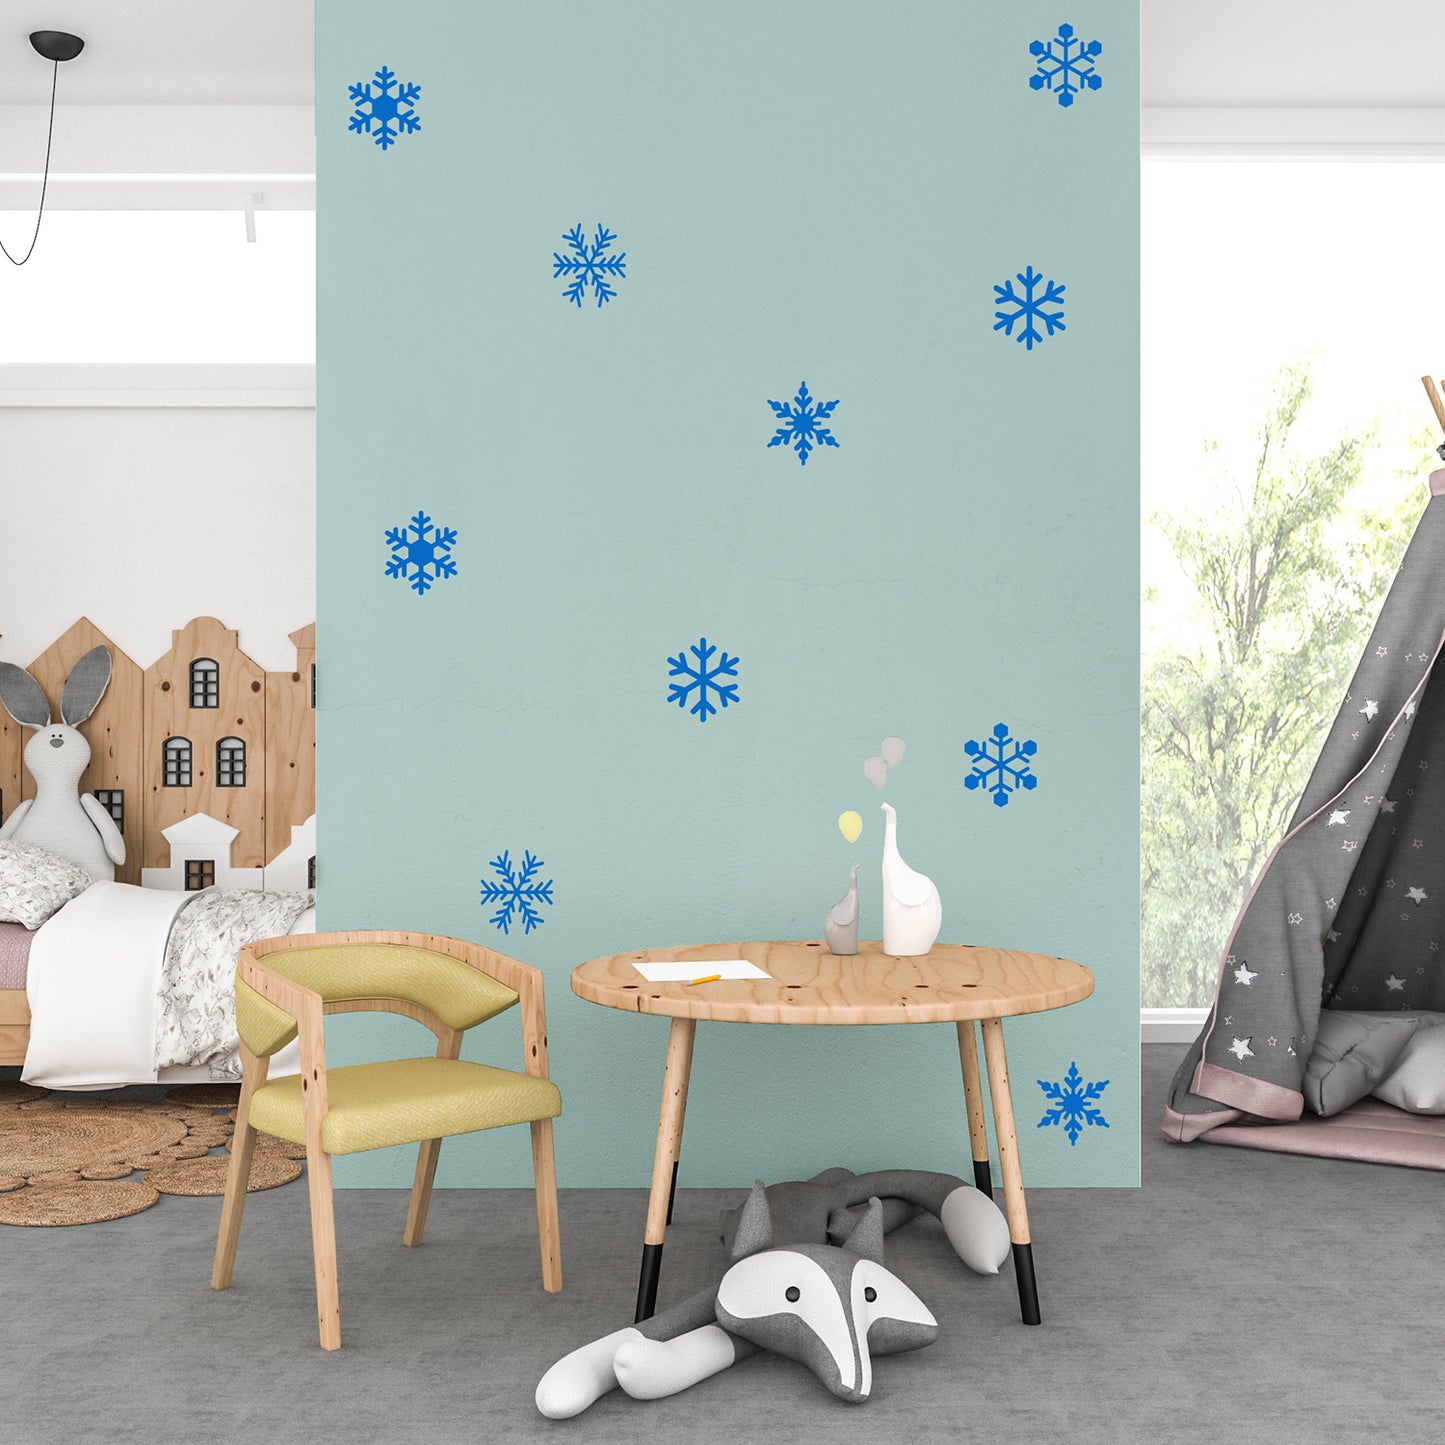 Winter snowflakes | Wall pattern